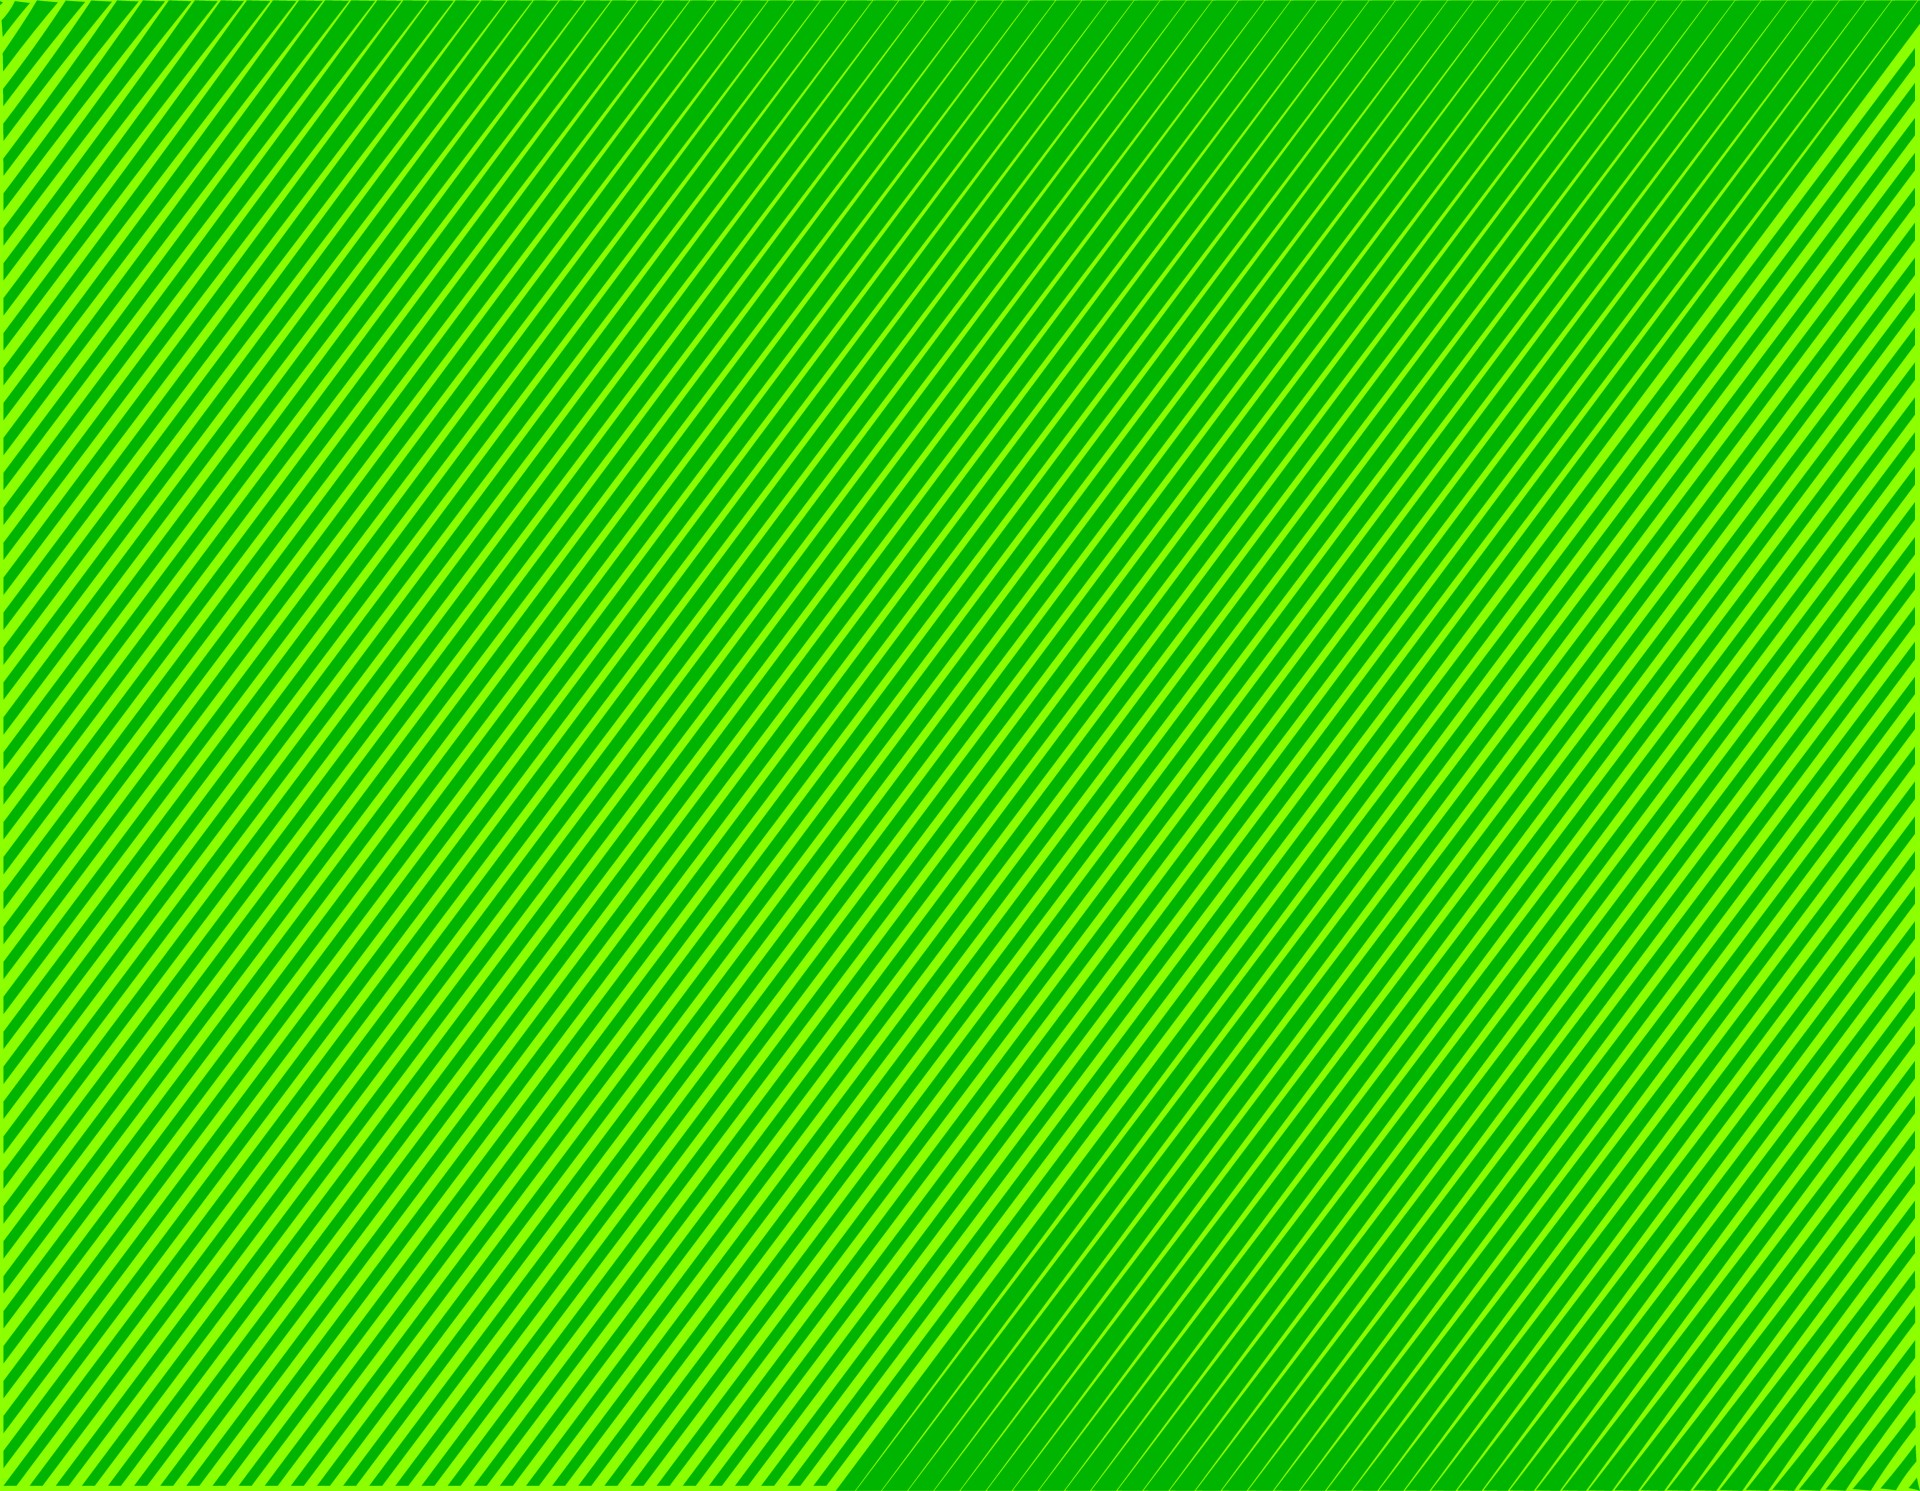 Green Background Images - Public Domain Pictures - Page 1